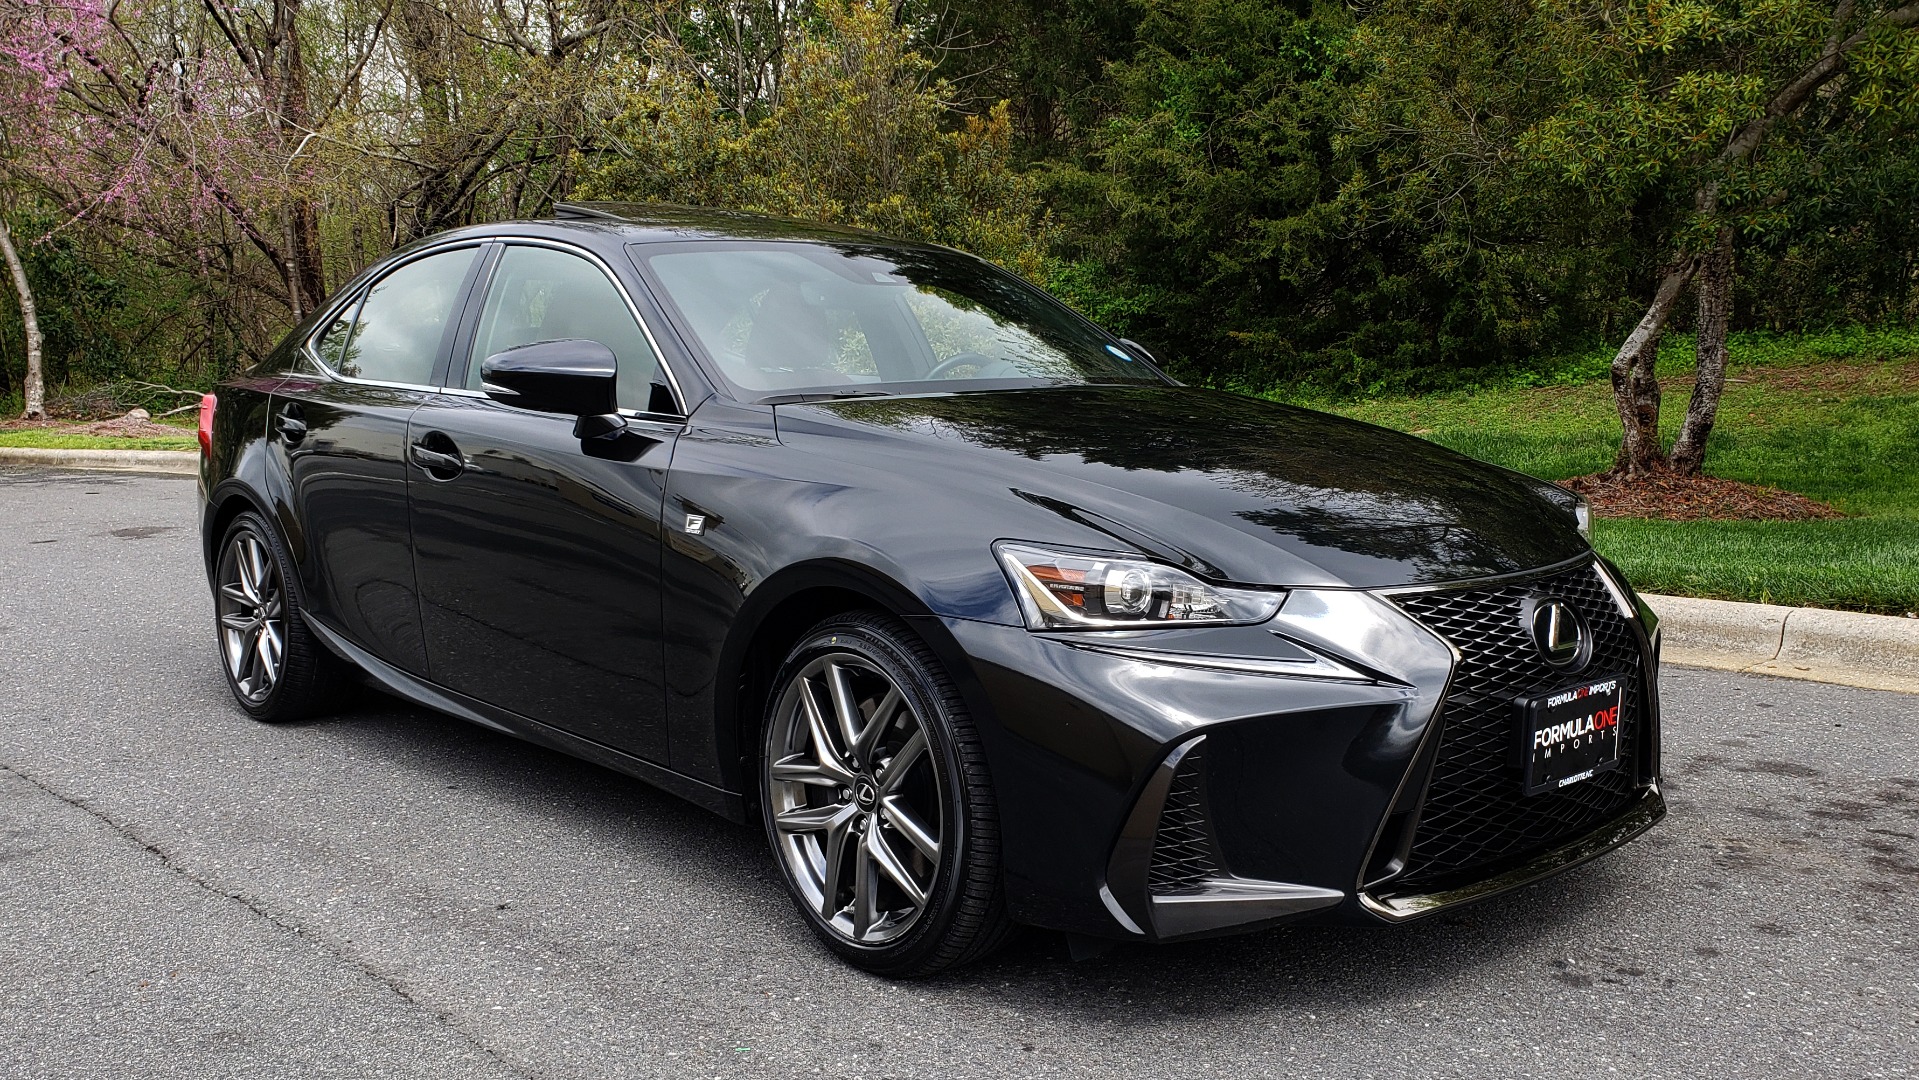 Used 2017 Lexus IS 300 F SPORT AWD / NAV / SUNROOF / REARVIEW / VENT SEATS / BSM for sale Sold at Formula Imports in Charlotte NC 28227 4